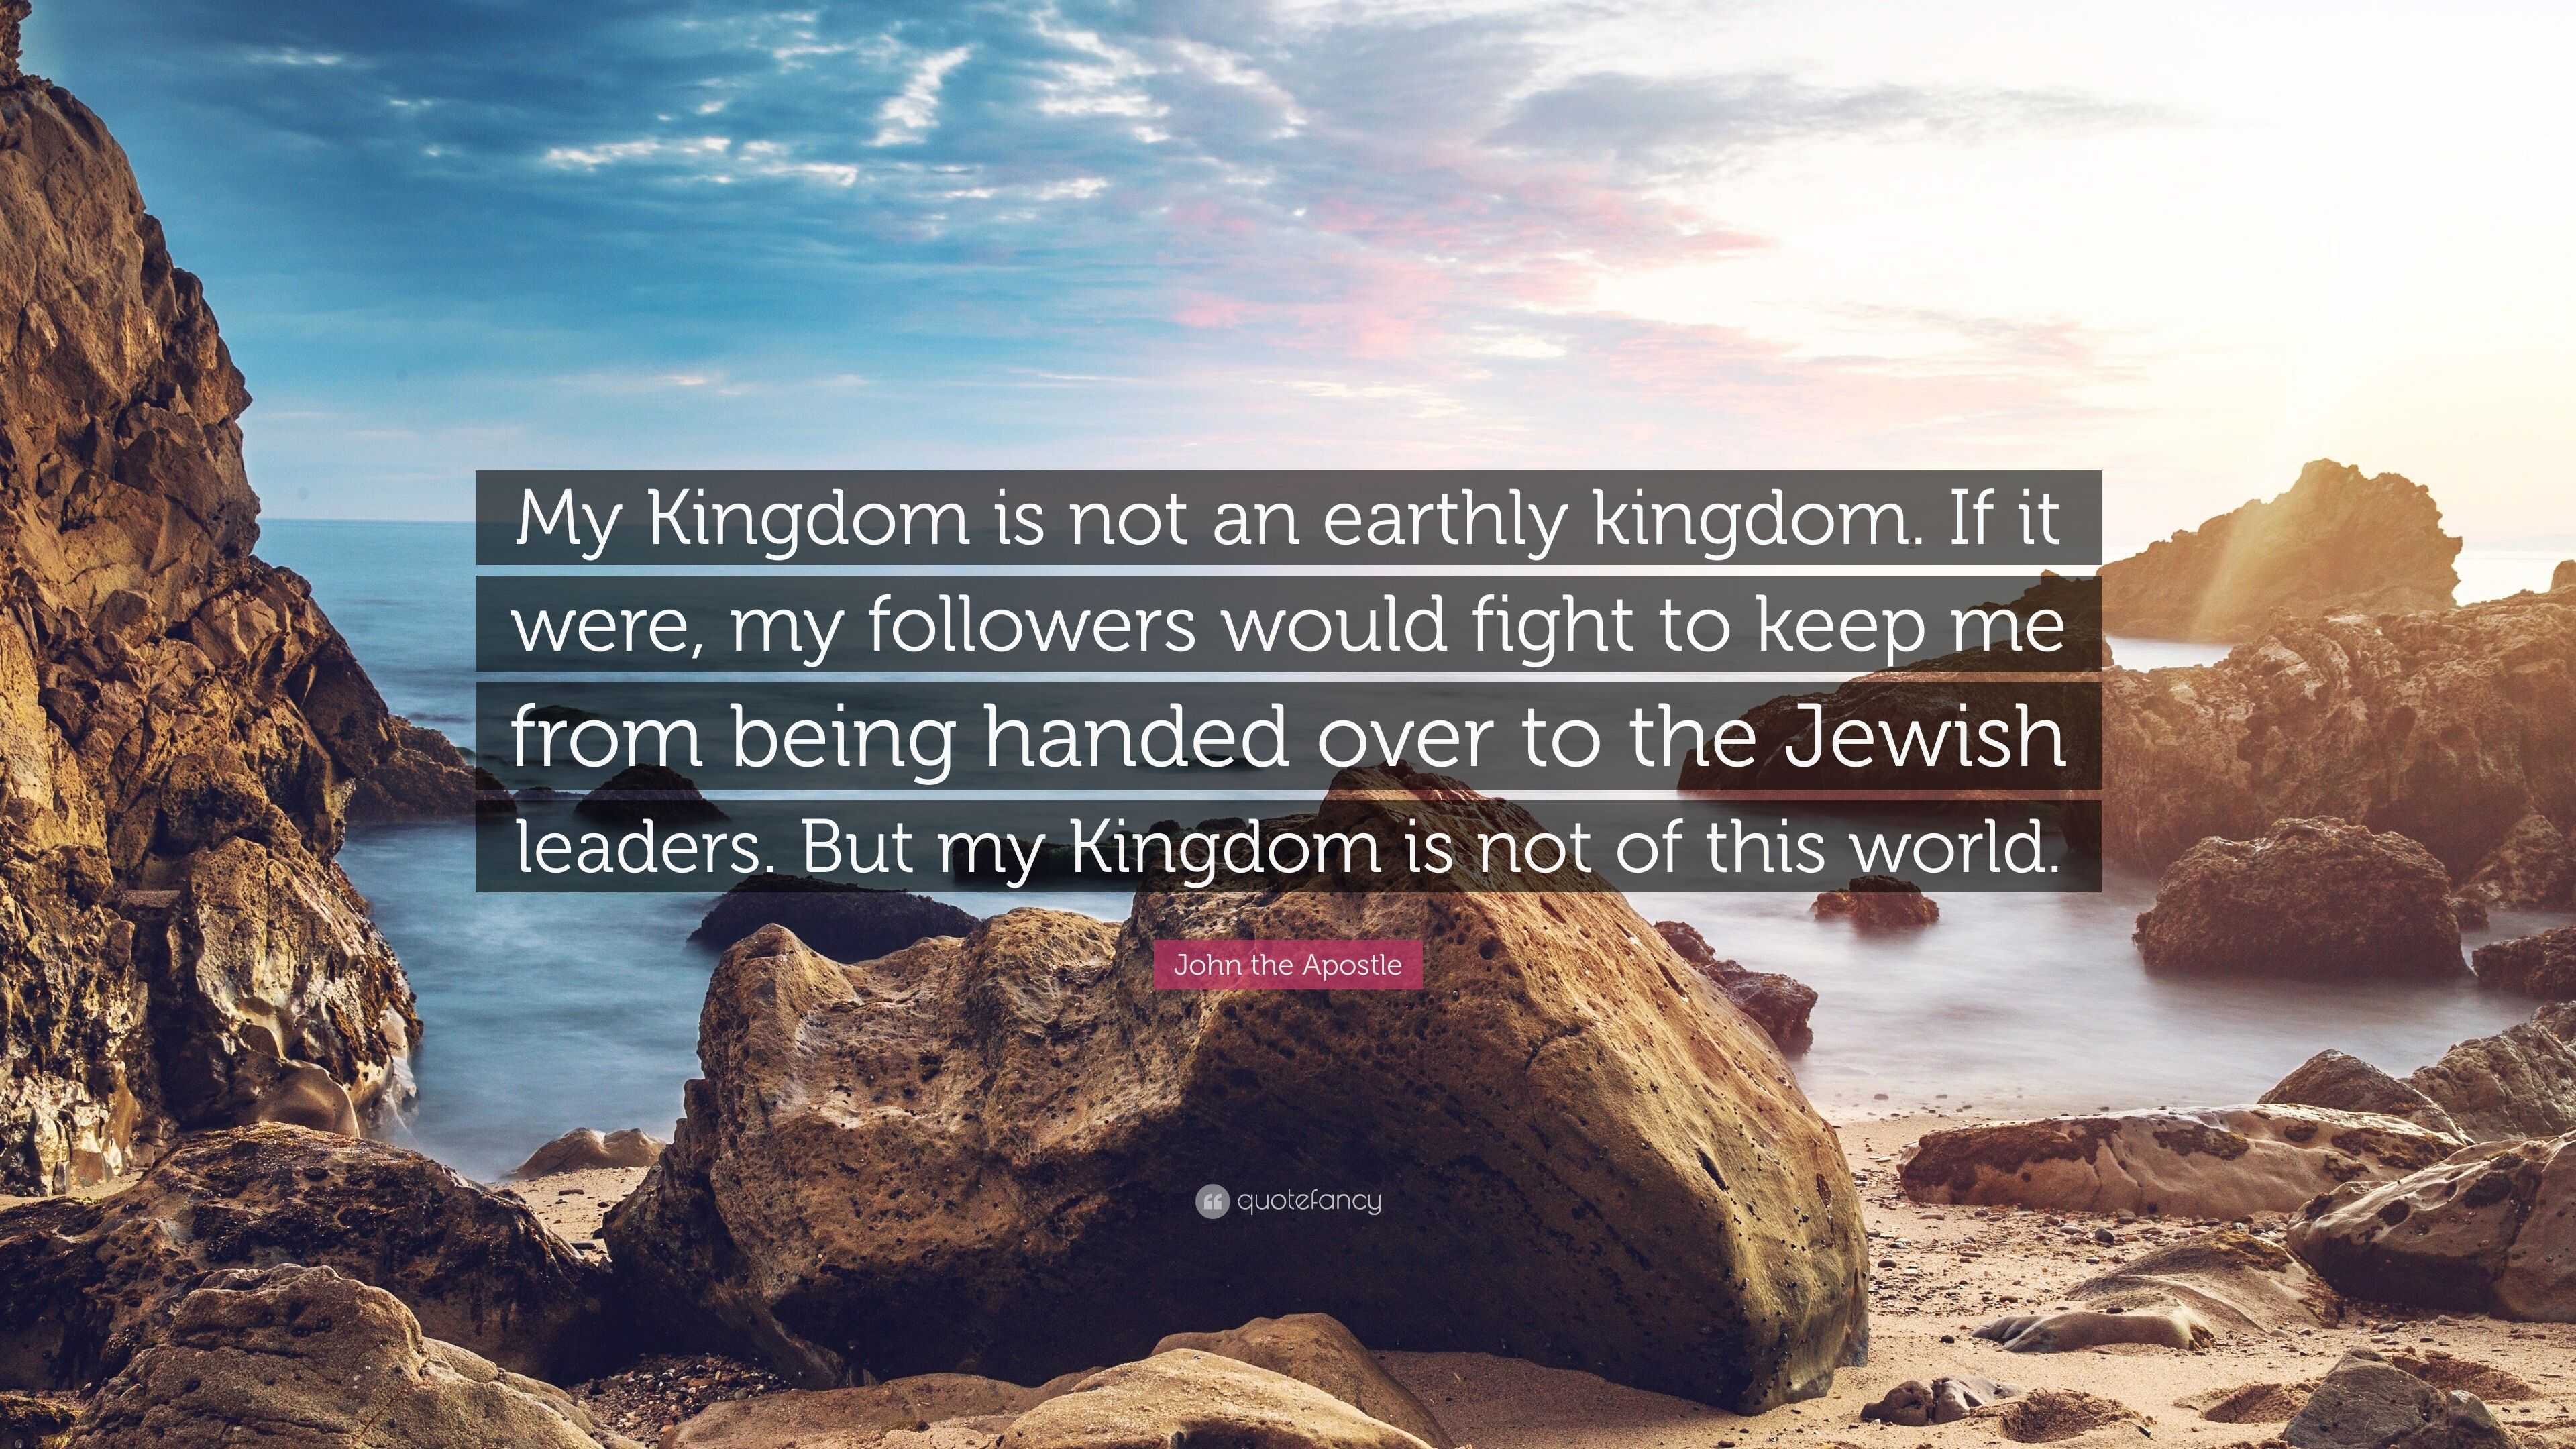 John the Apostle Quote: “My Kingdom is not an earthly kingdom. If it were,  my followers would fight to keep me from being handed over to the Jewi”